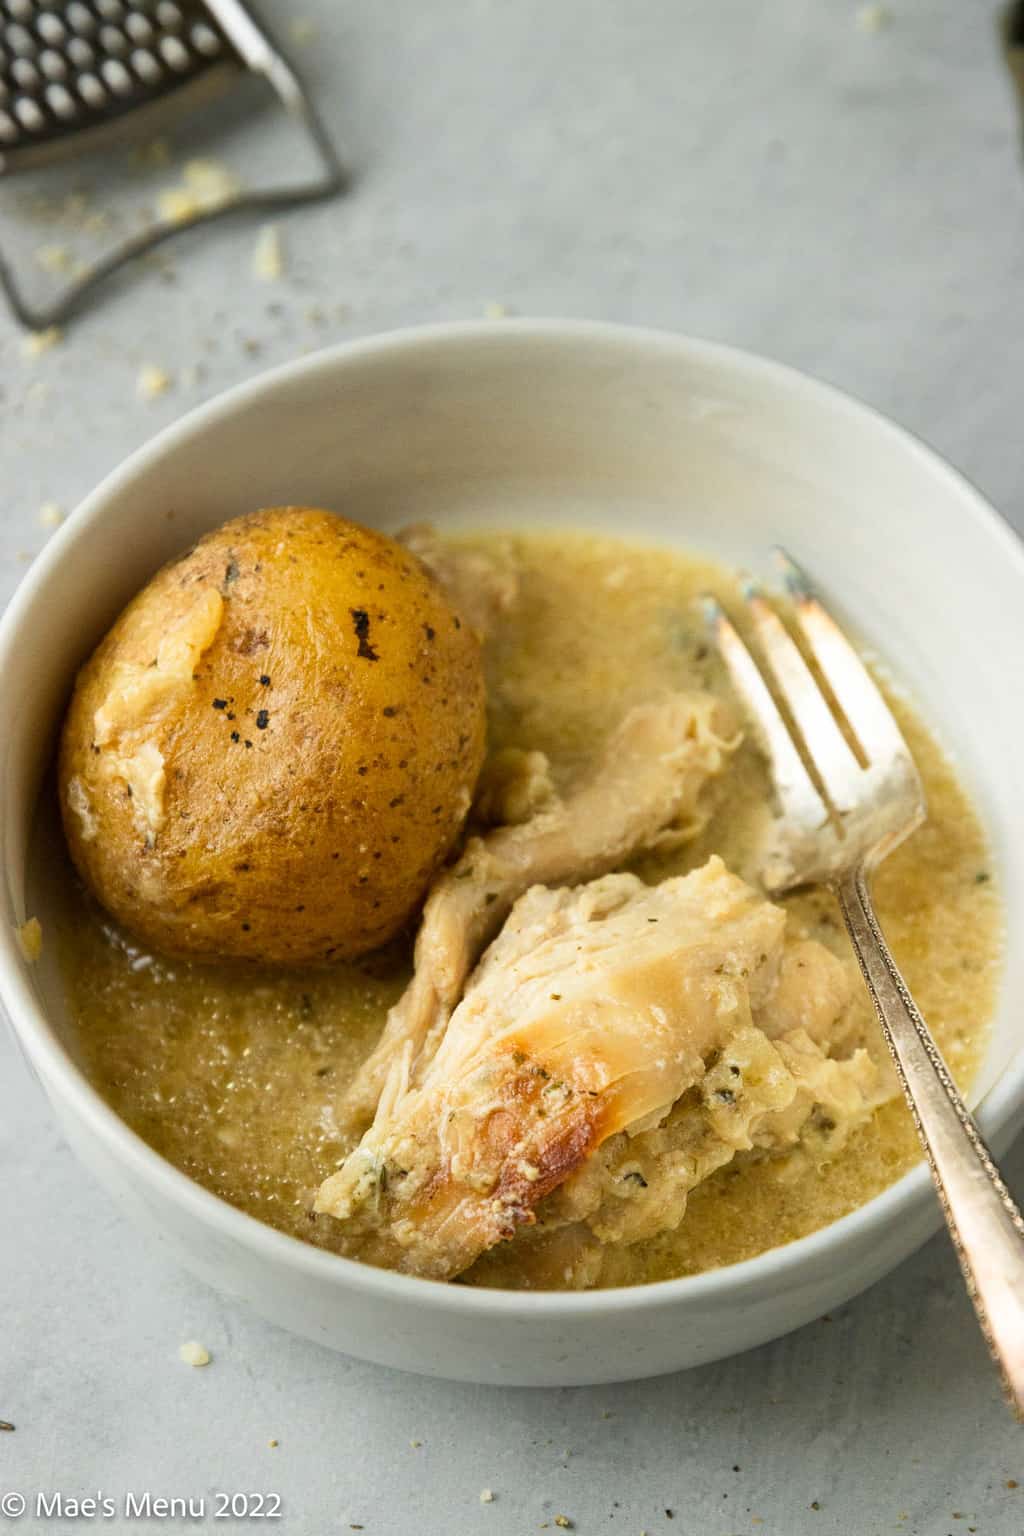 An up-close hot of a bowl of chicken and potatoes in a creamy sauce.